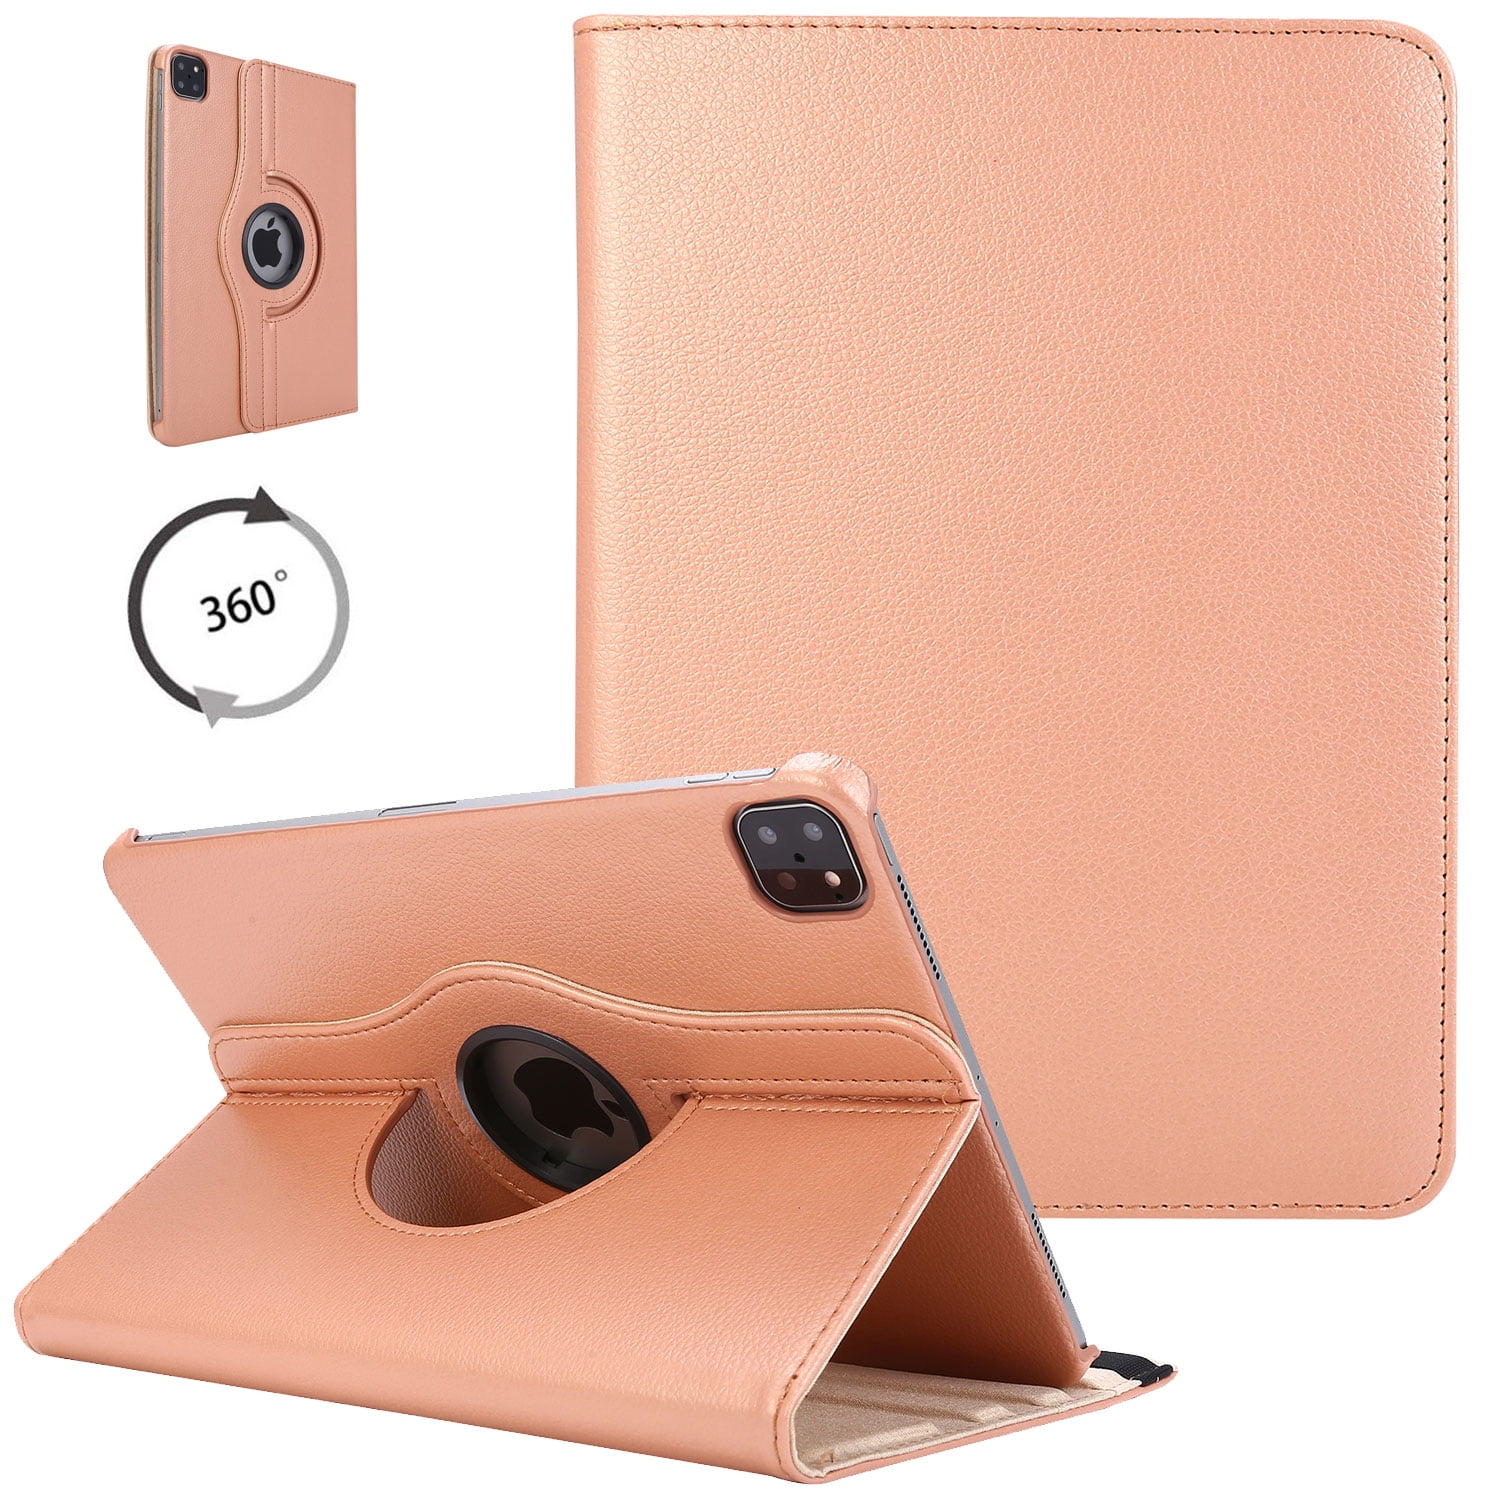 iPad Pro 12.9 (2020 & 2021 Model) Brown Squared Rotating Stand Cover Case Pouch